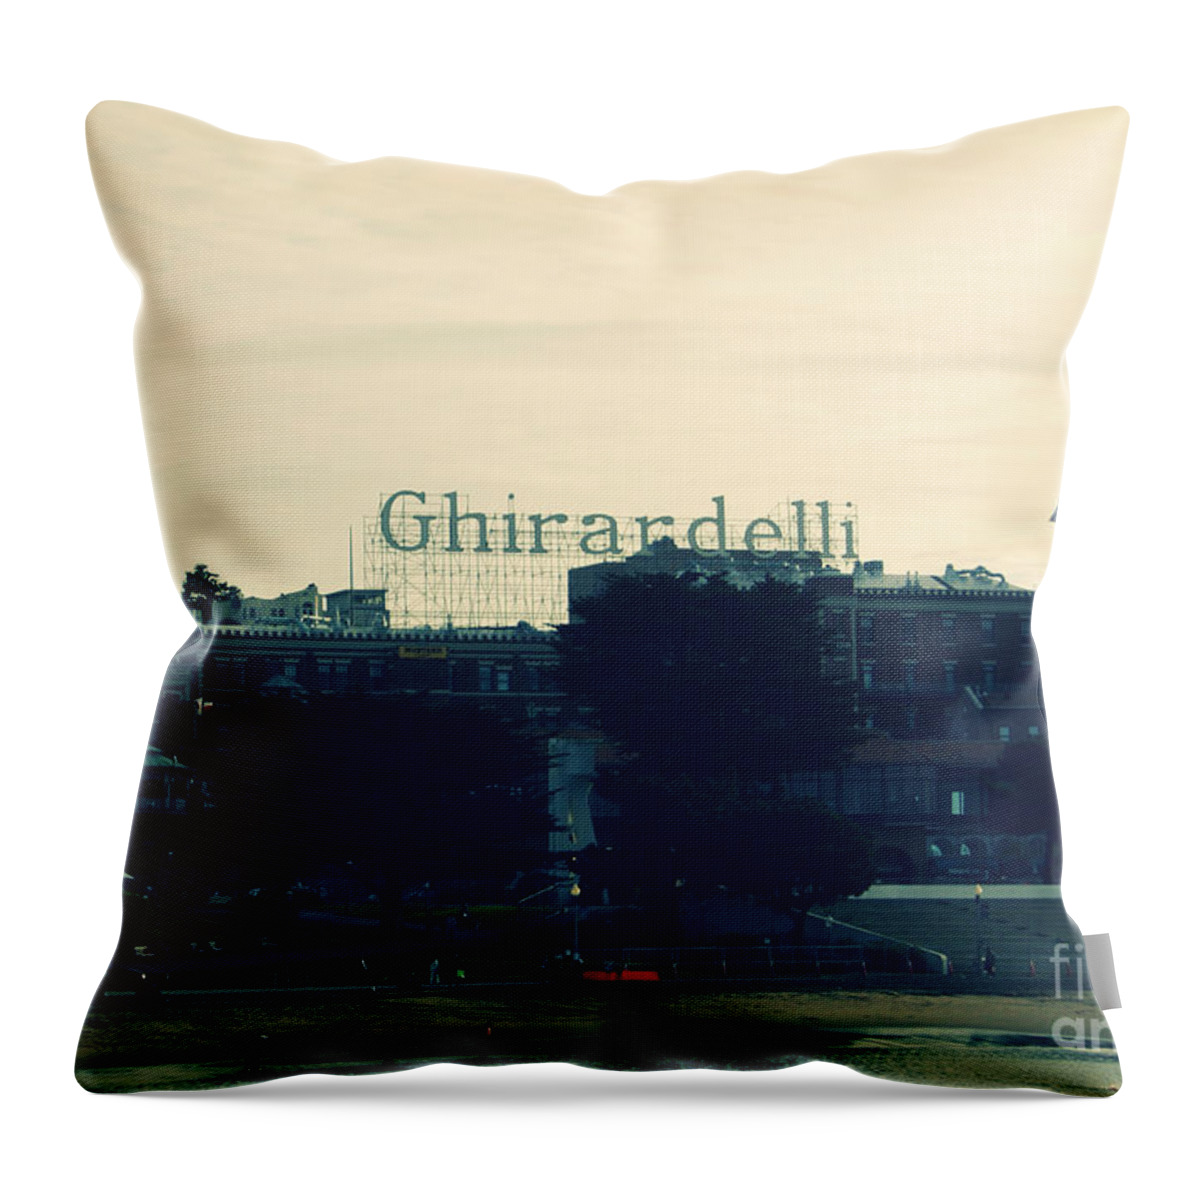 Ghirardelli Square Throw Pillow featuring the photograph Ghirardelli Square by Linda Woods